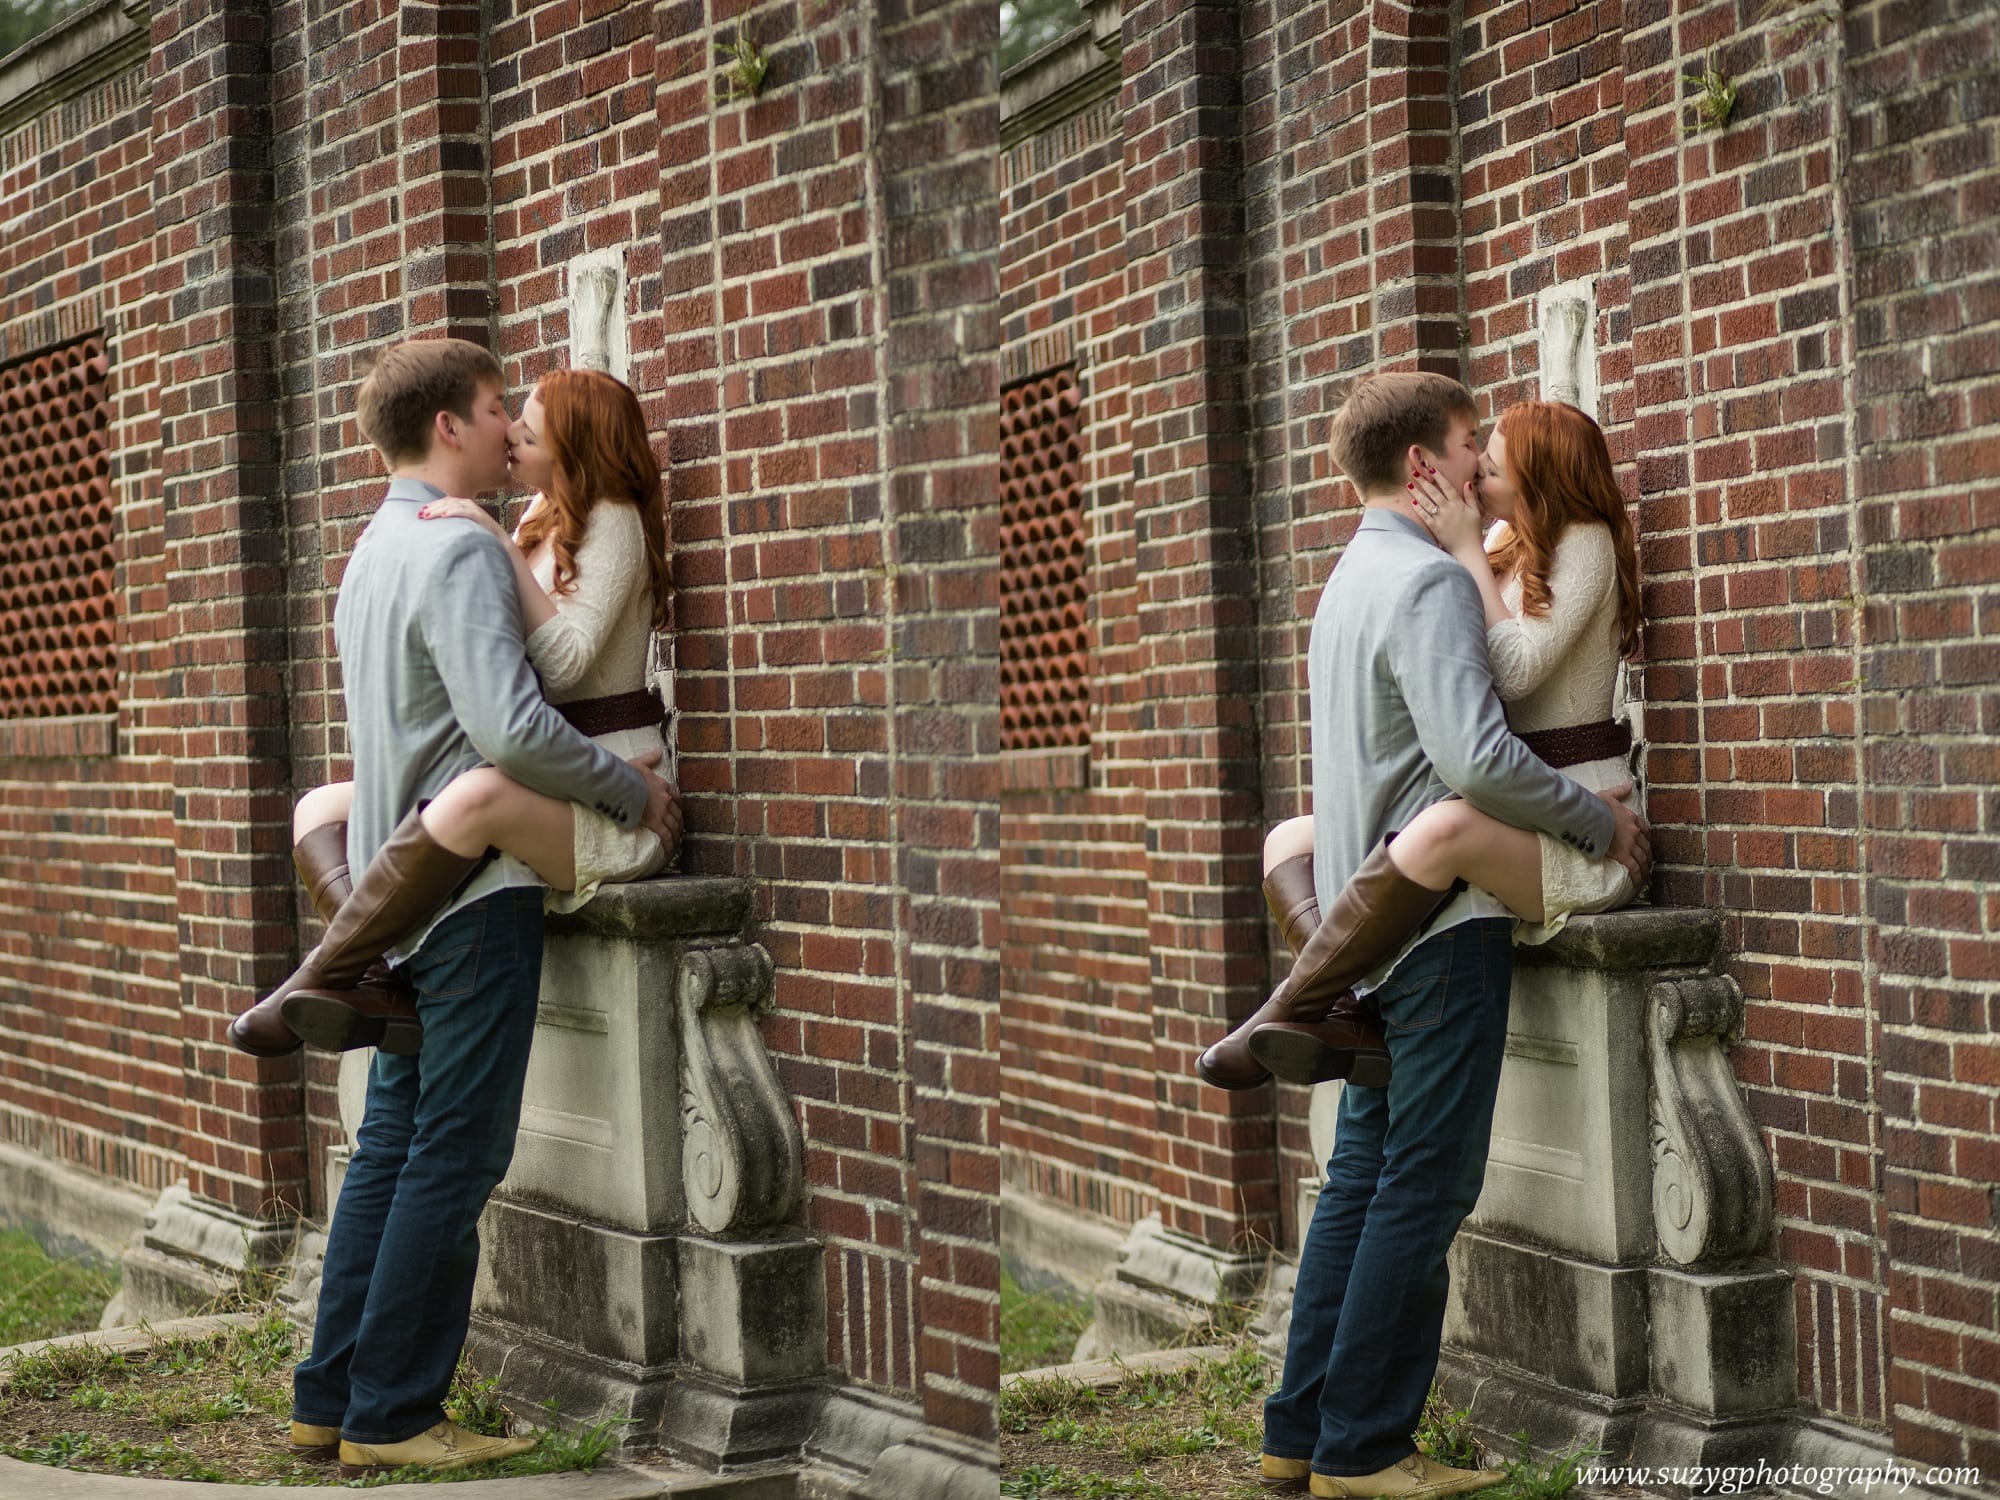 engagements-new orleans-texas-baton rouge-lake charles-suzy g-photography-suzygphotography_0125